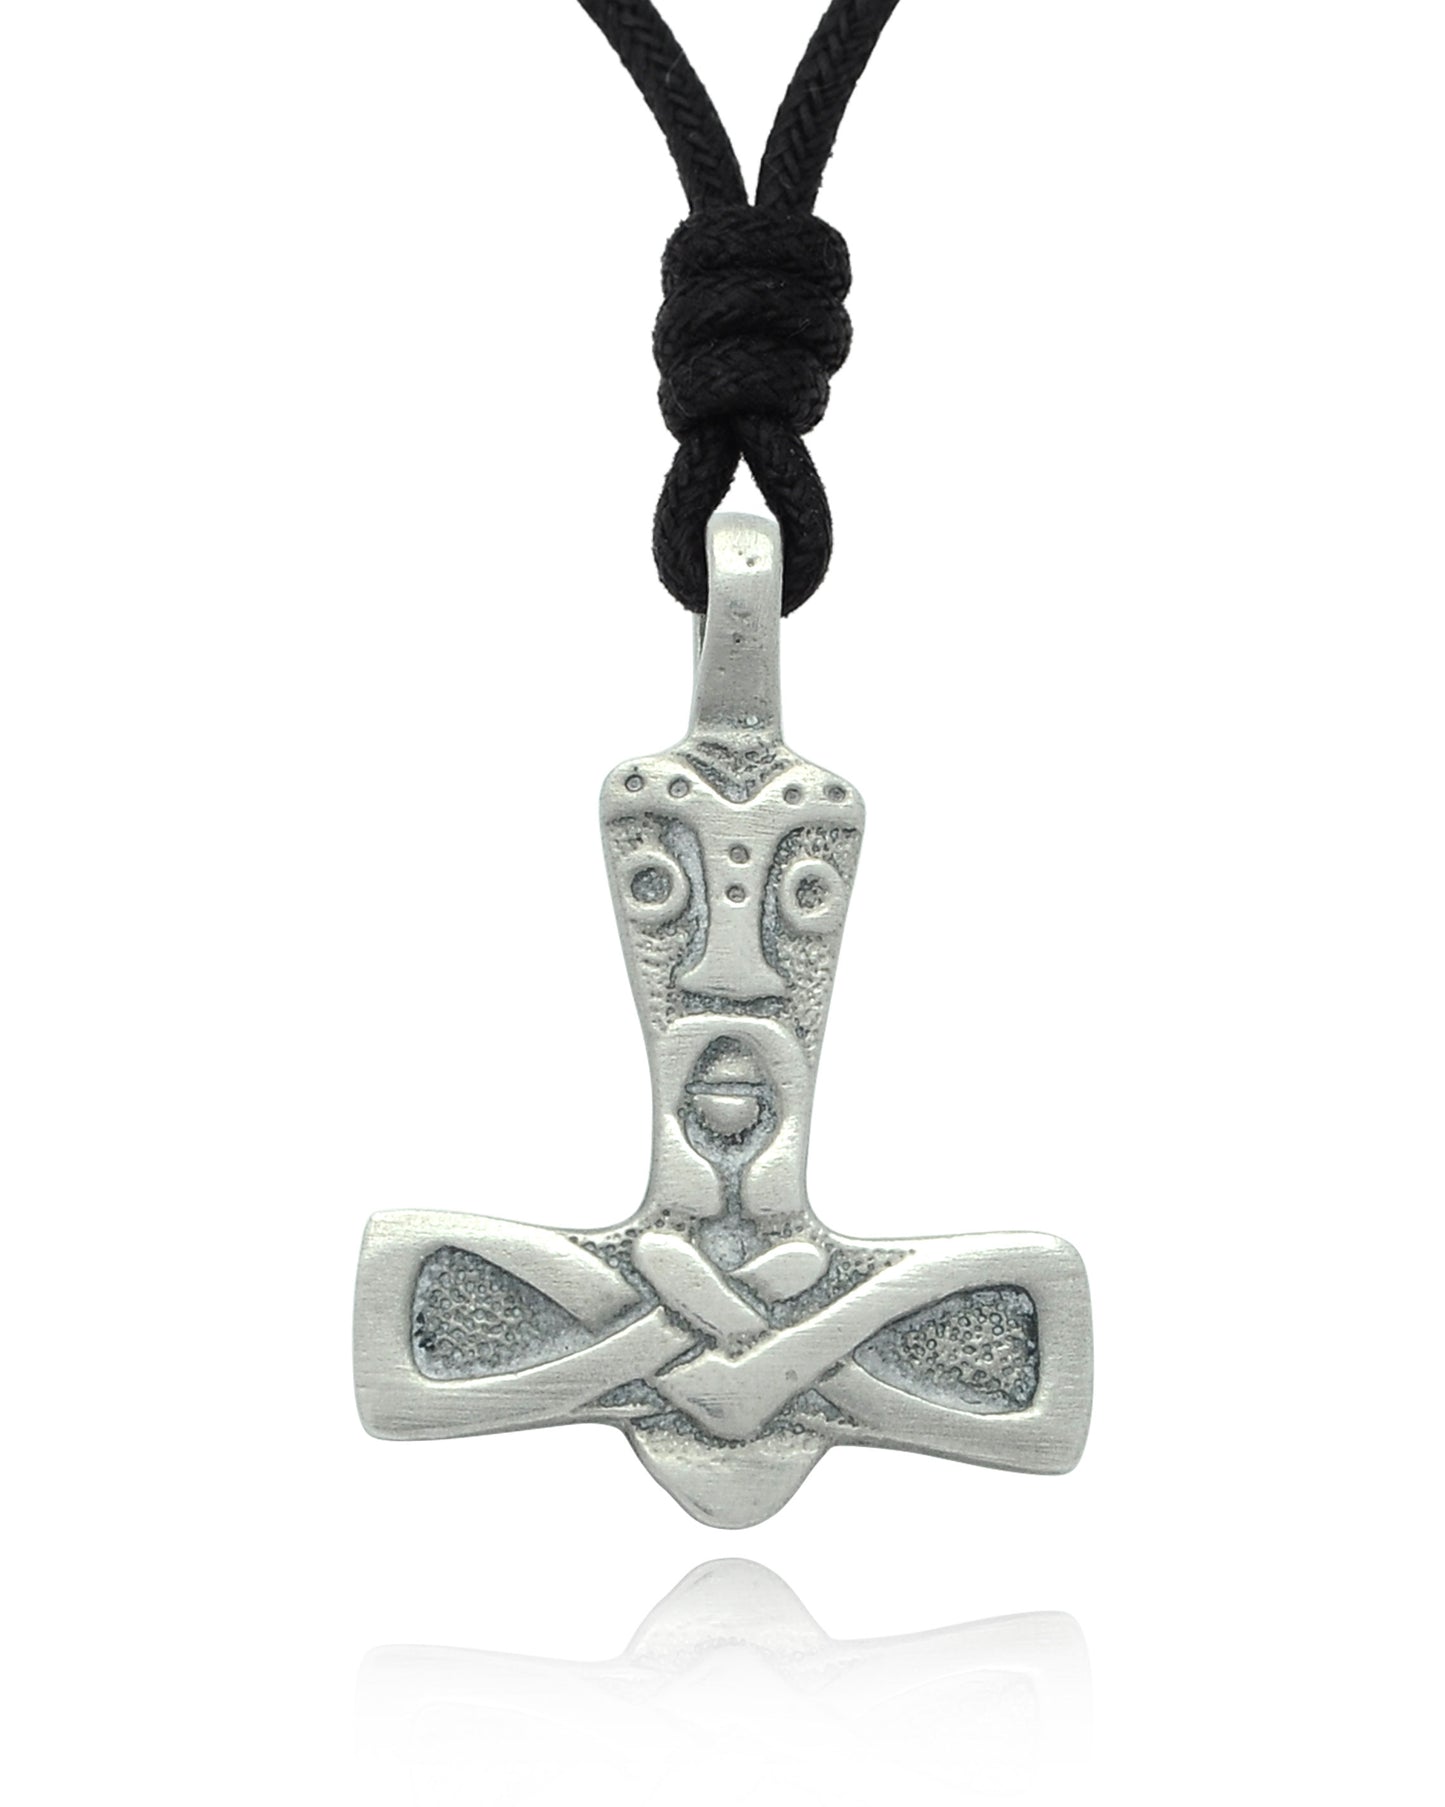 Tiki Man Hammer Silver Pewter Charm Necklace Pendant Jewelry